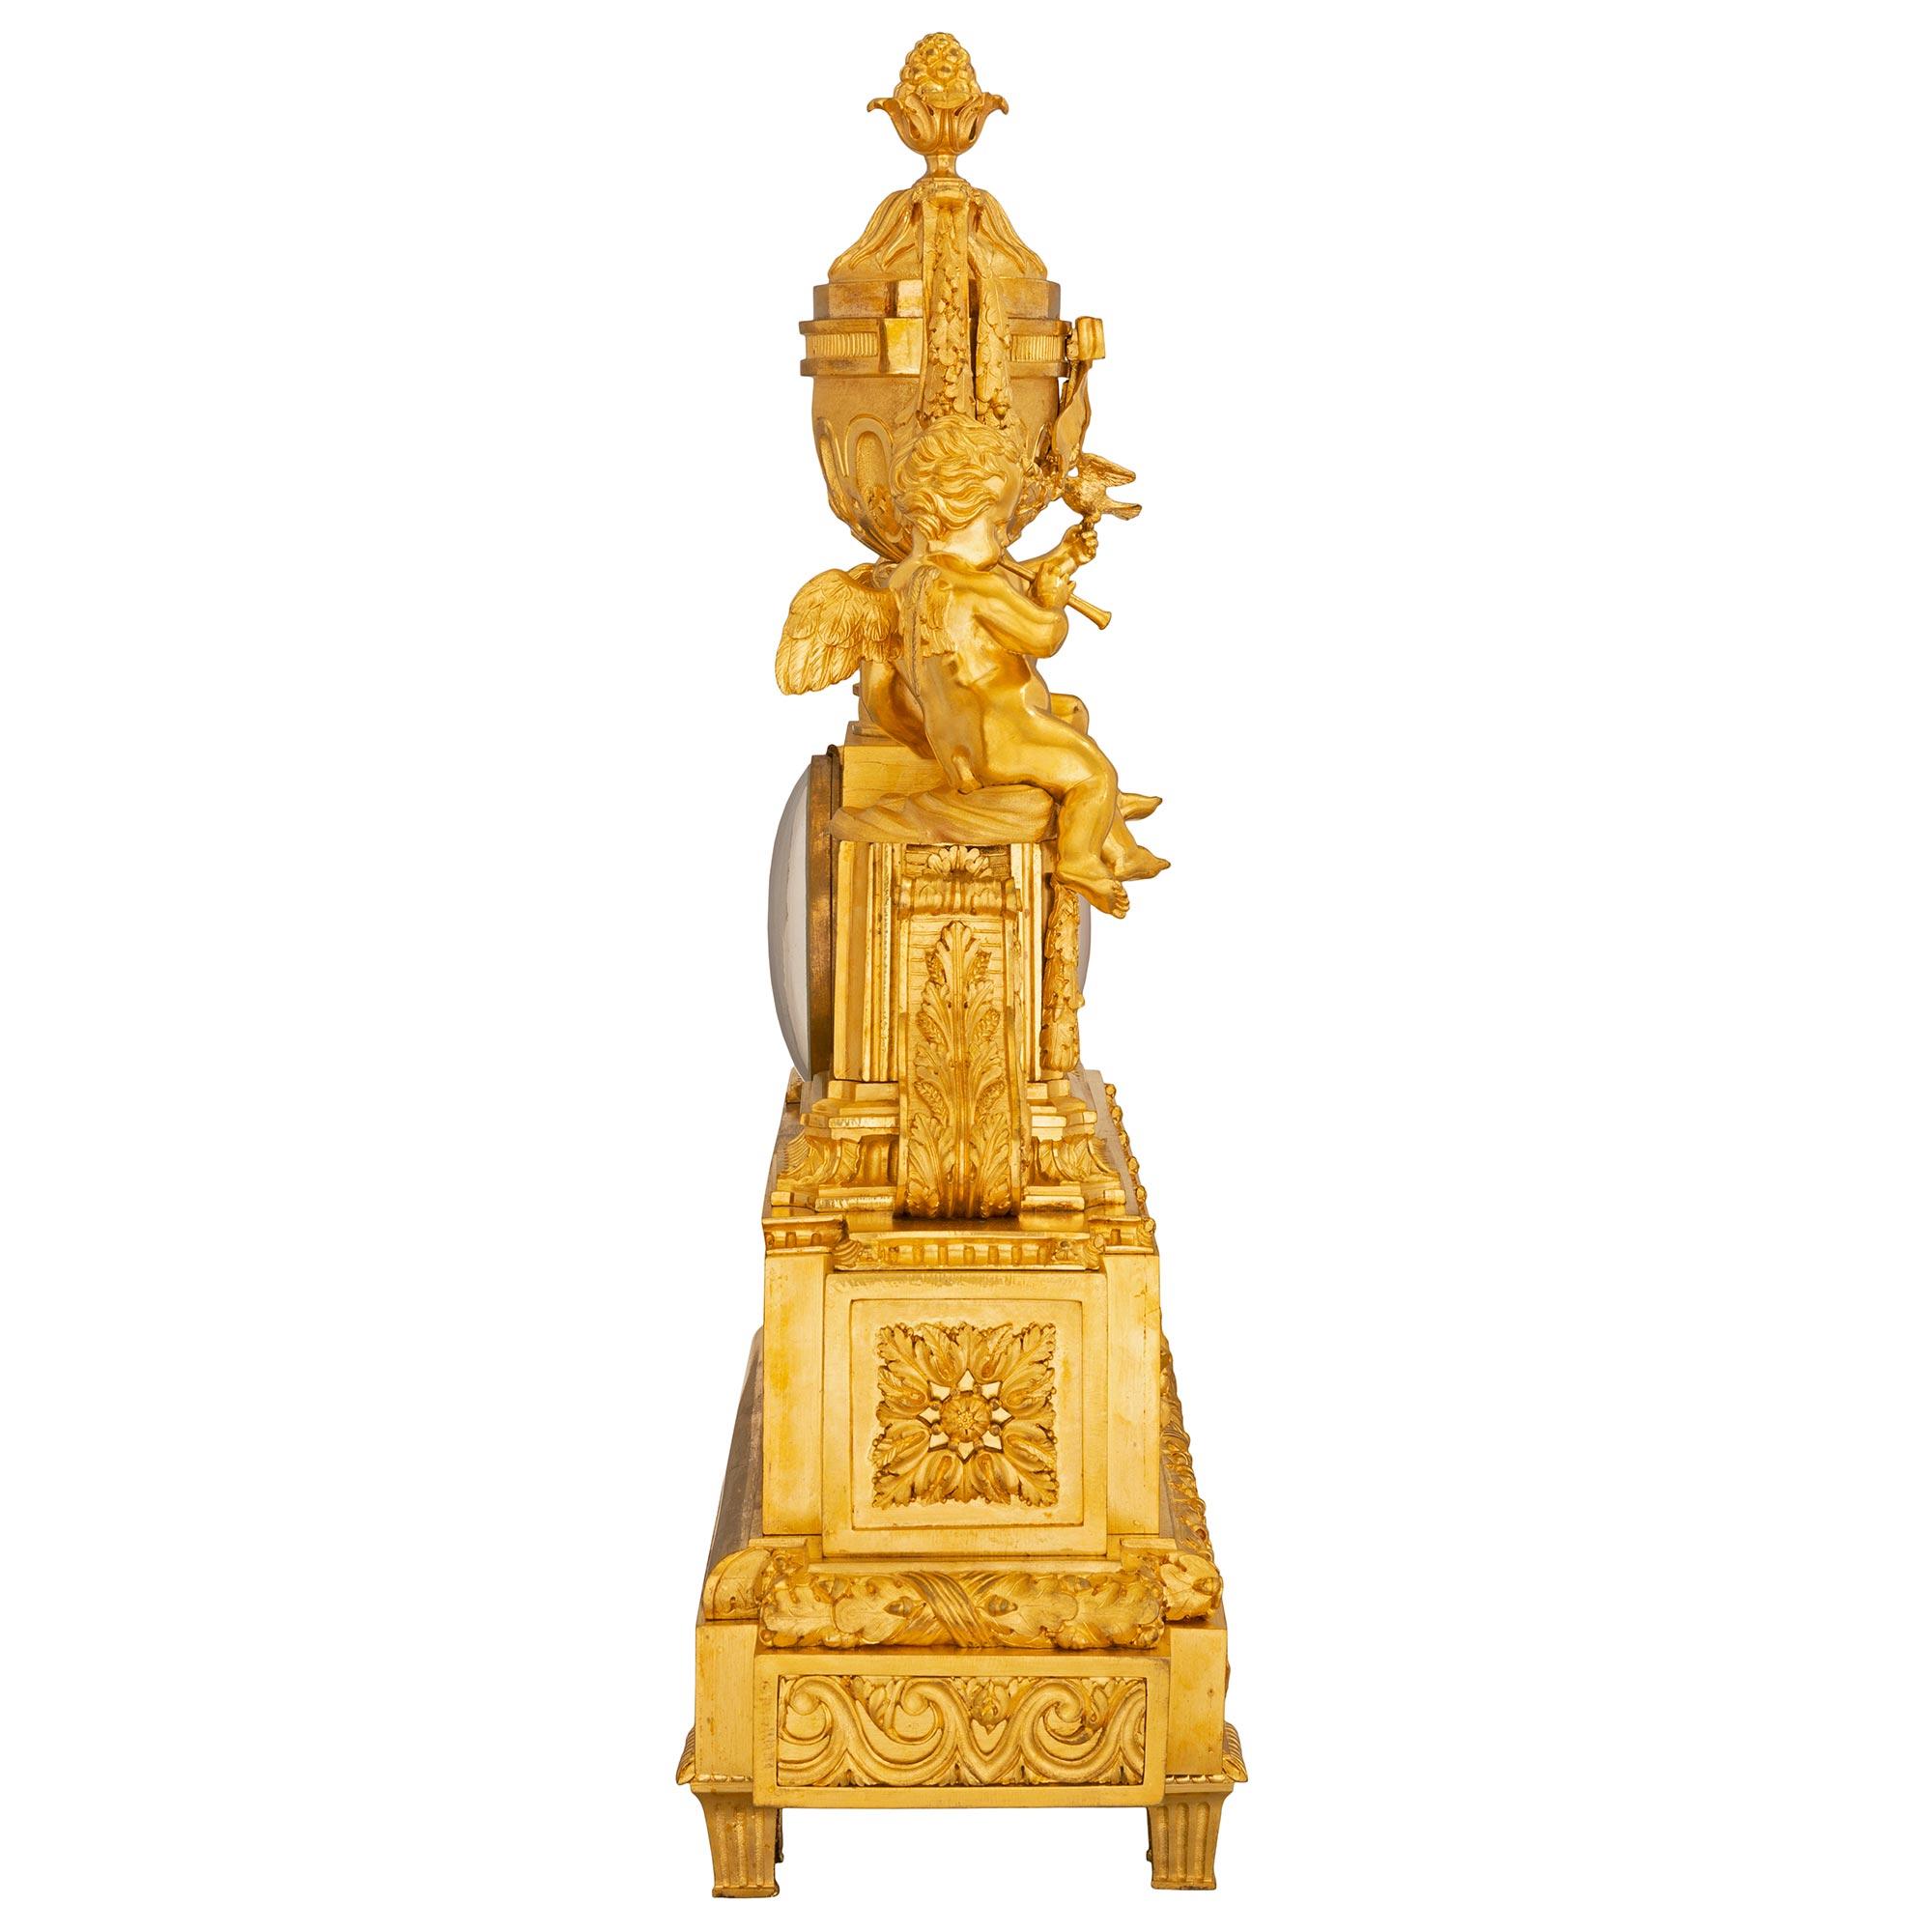 French 19th Century Louis XVI St. Belle Époque Period Ormolu Clock In Good Condition For Sale In West Palm Beach, FL